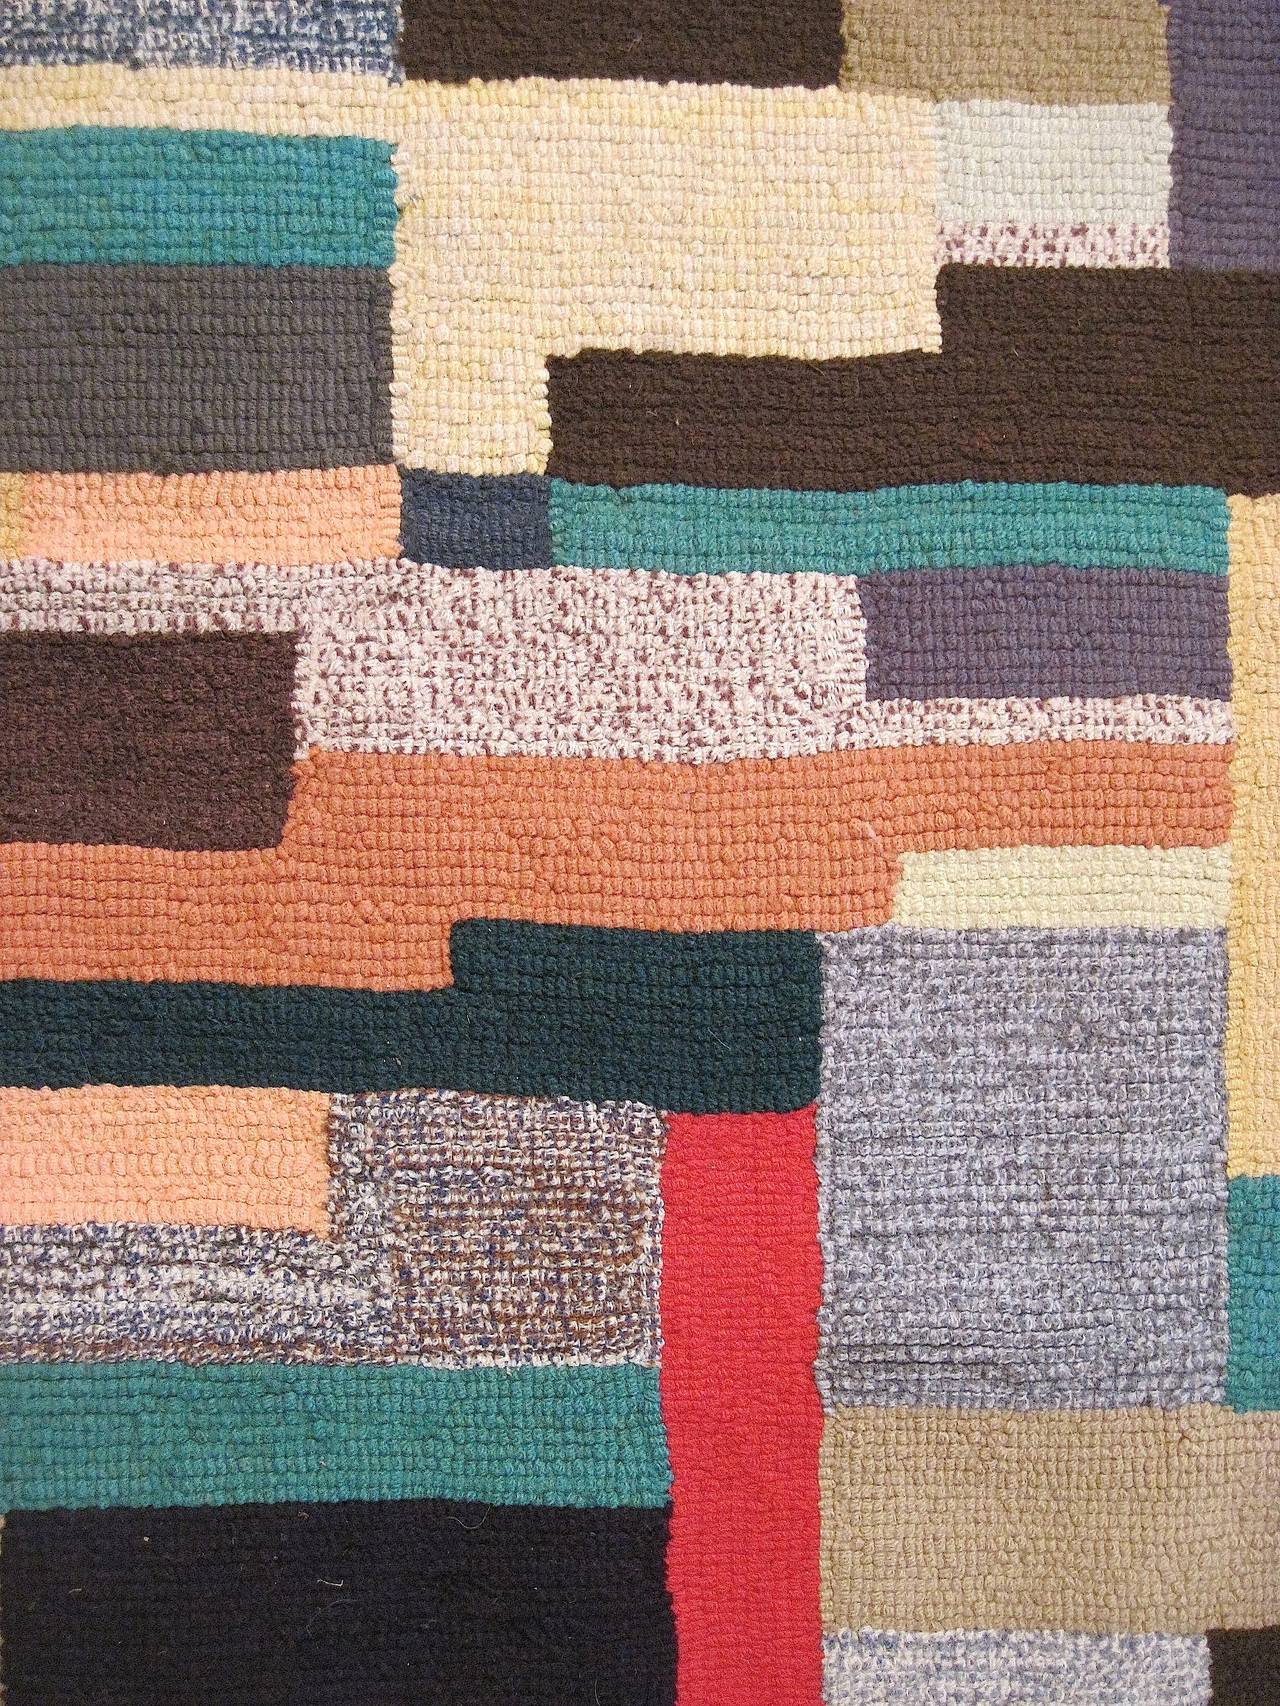 Late 20th Century Unique Mid-Century Modern American Hooked Rug Runner